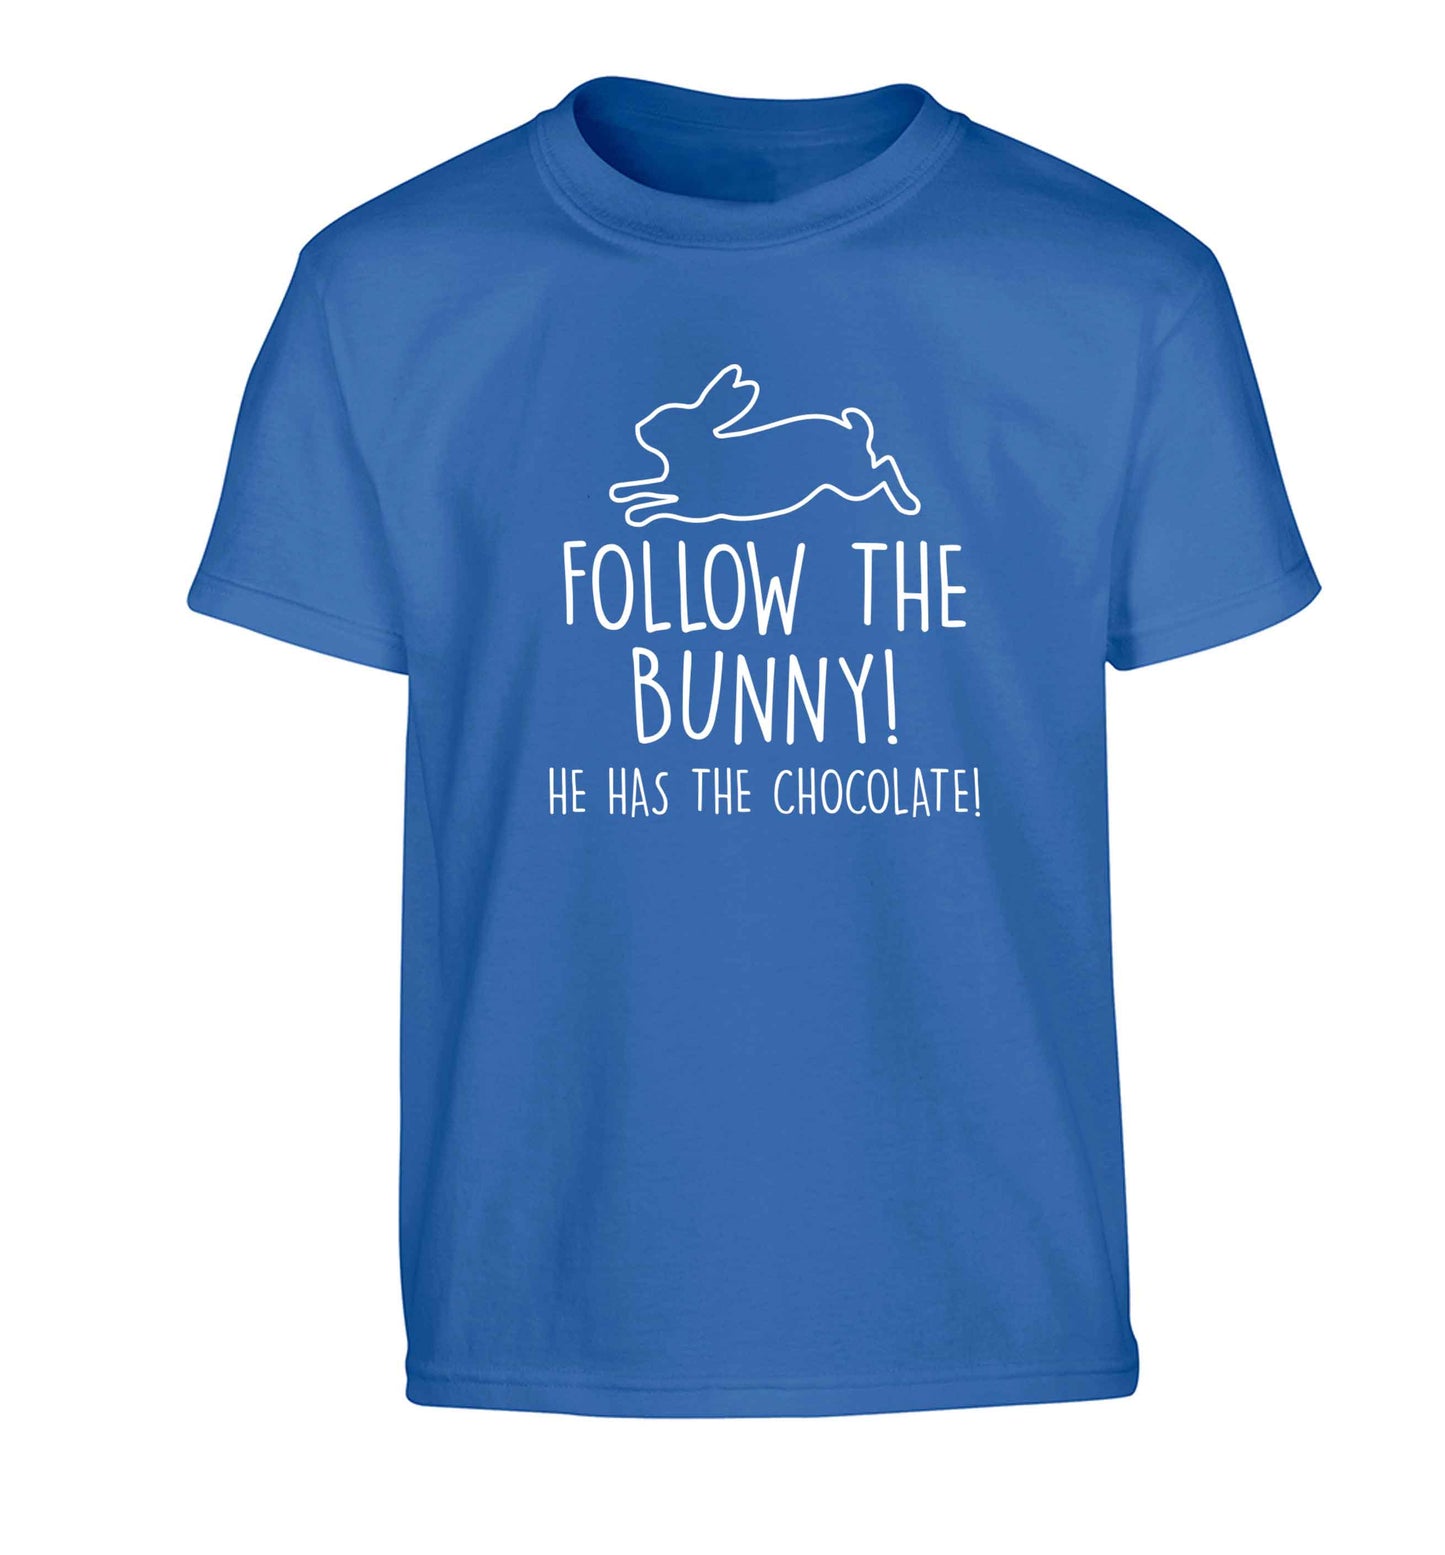 Follow the bunny! He has the chocolate Children's blue Tshirt 12-13 Years